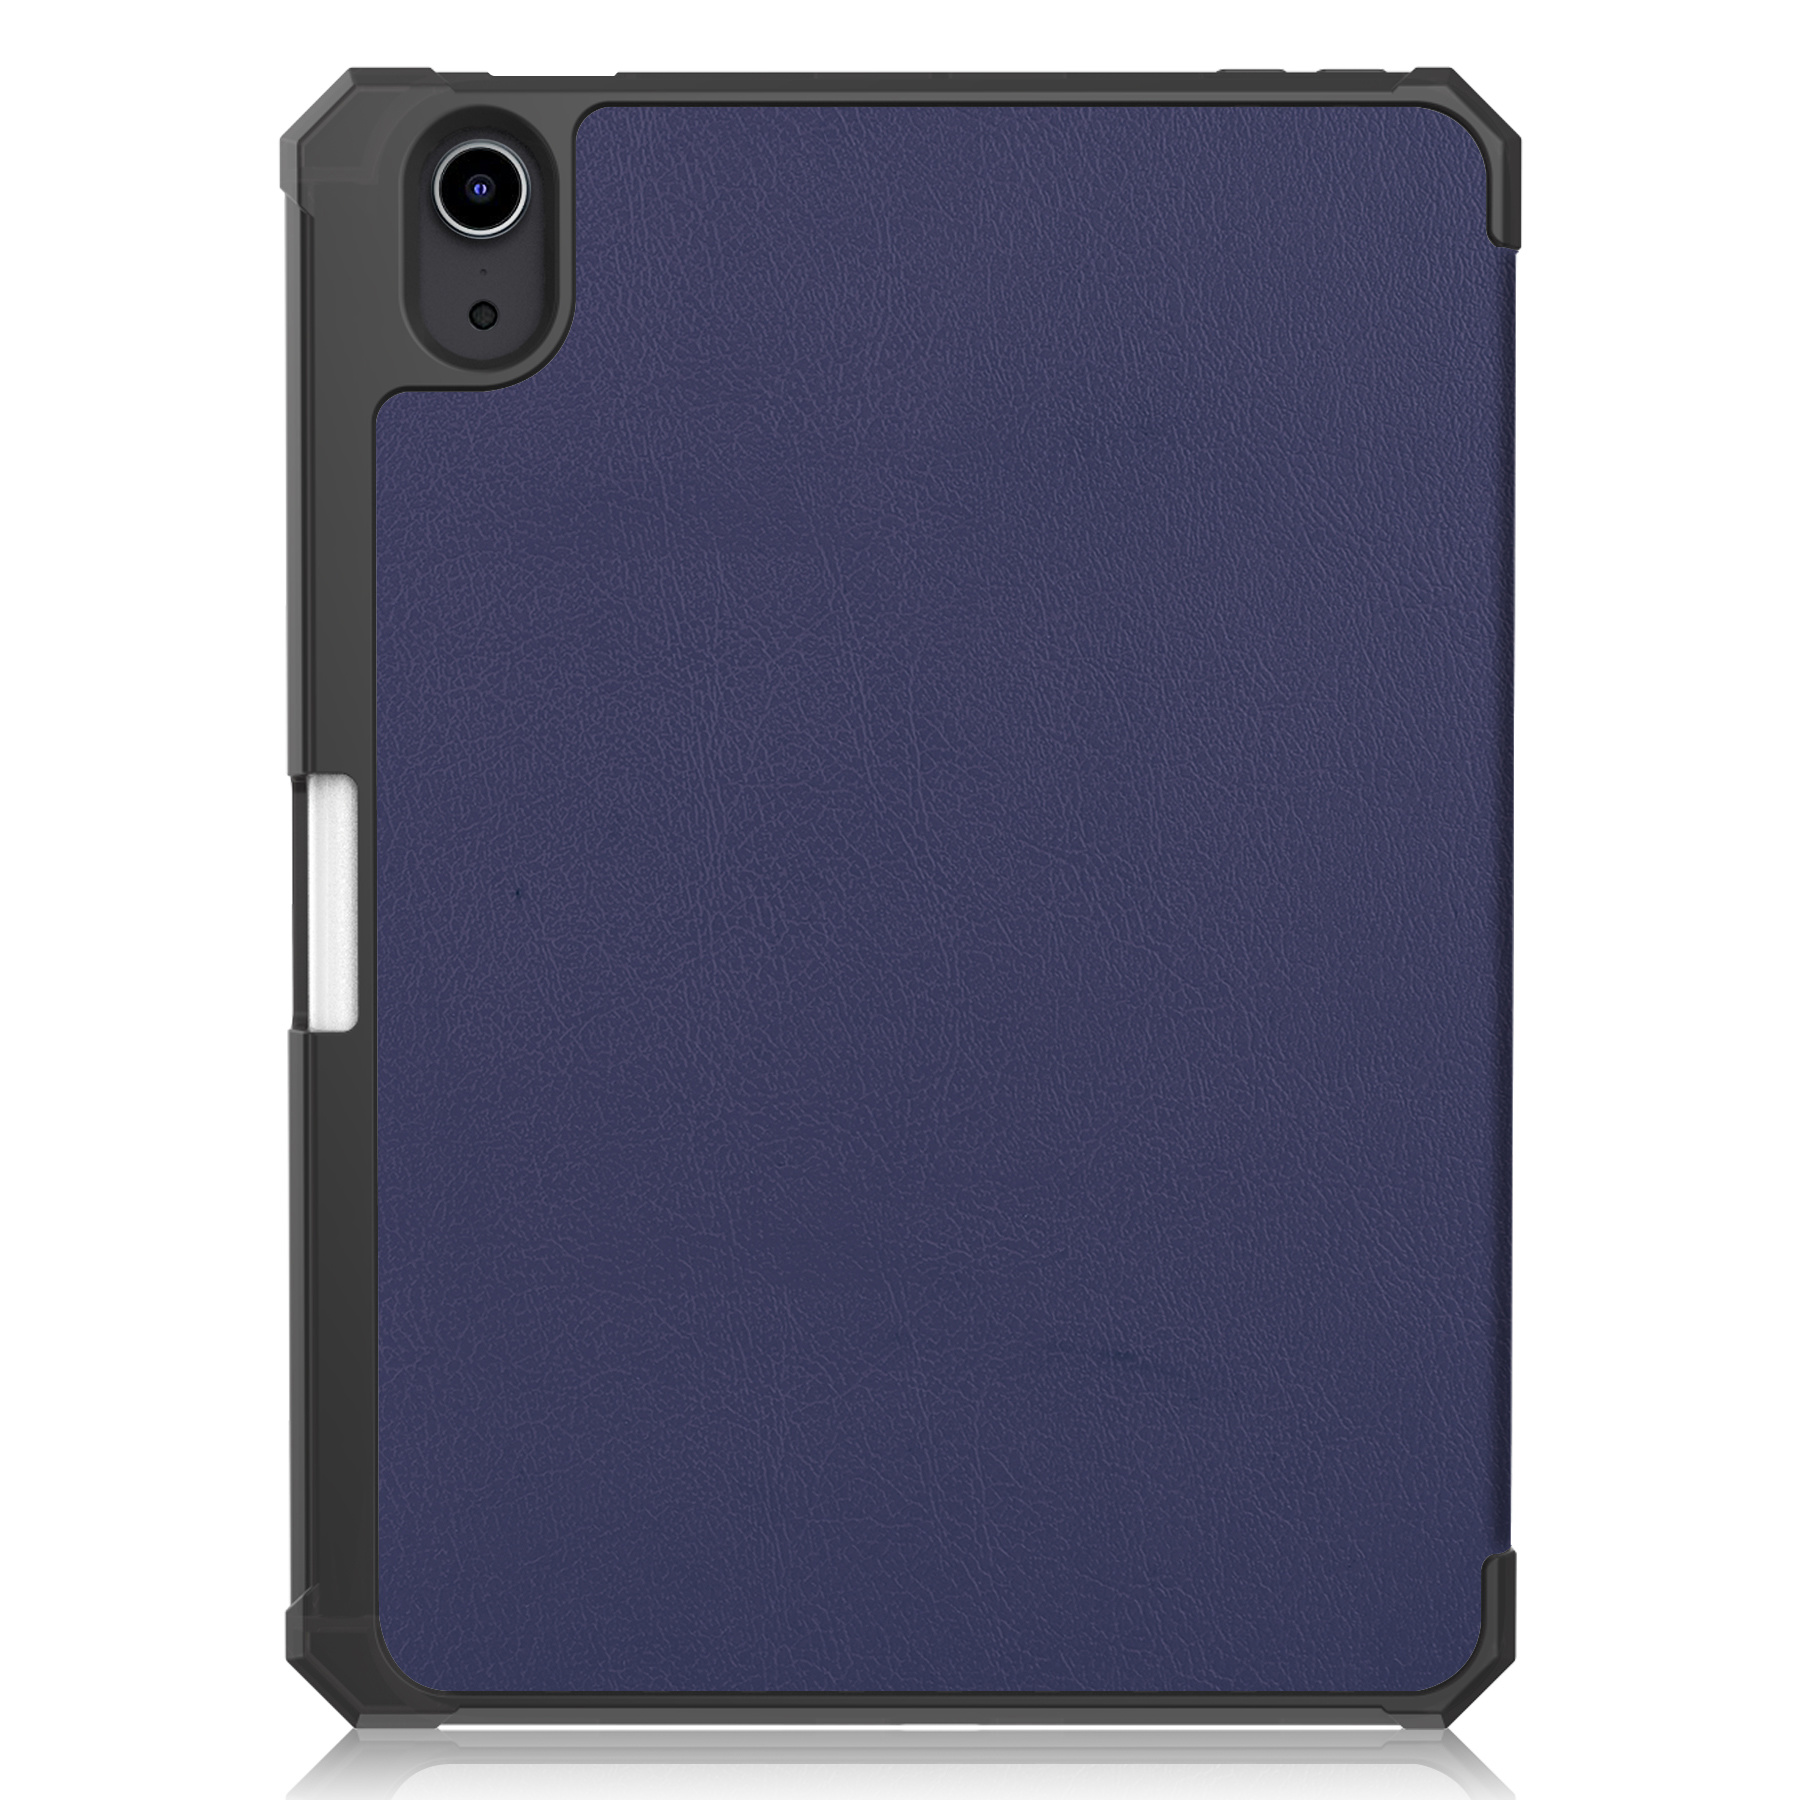 Nomfy iPad Mini 6 Hoesje Case Donker Blauw - Hoes Met Uitsparing Apple Pencil - iPad Mini 6 Hoes Hardcover Hoesje Donker Blauw Bookcase